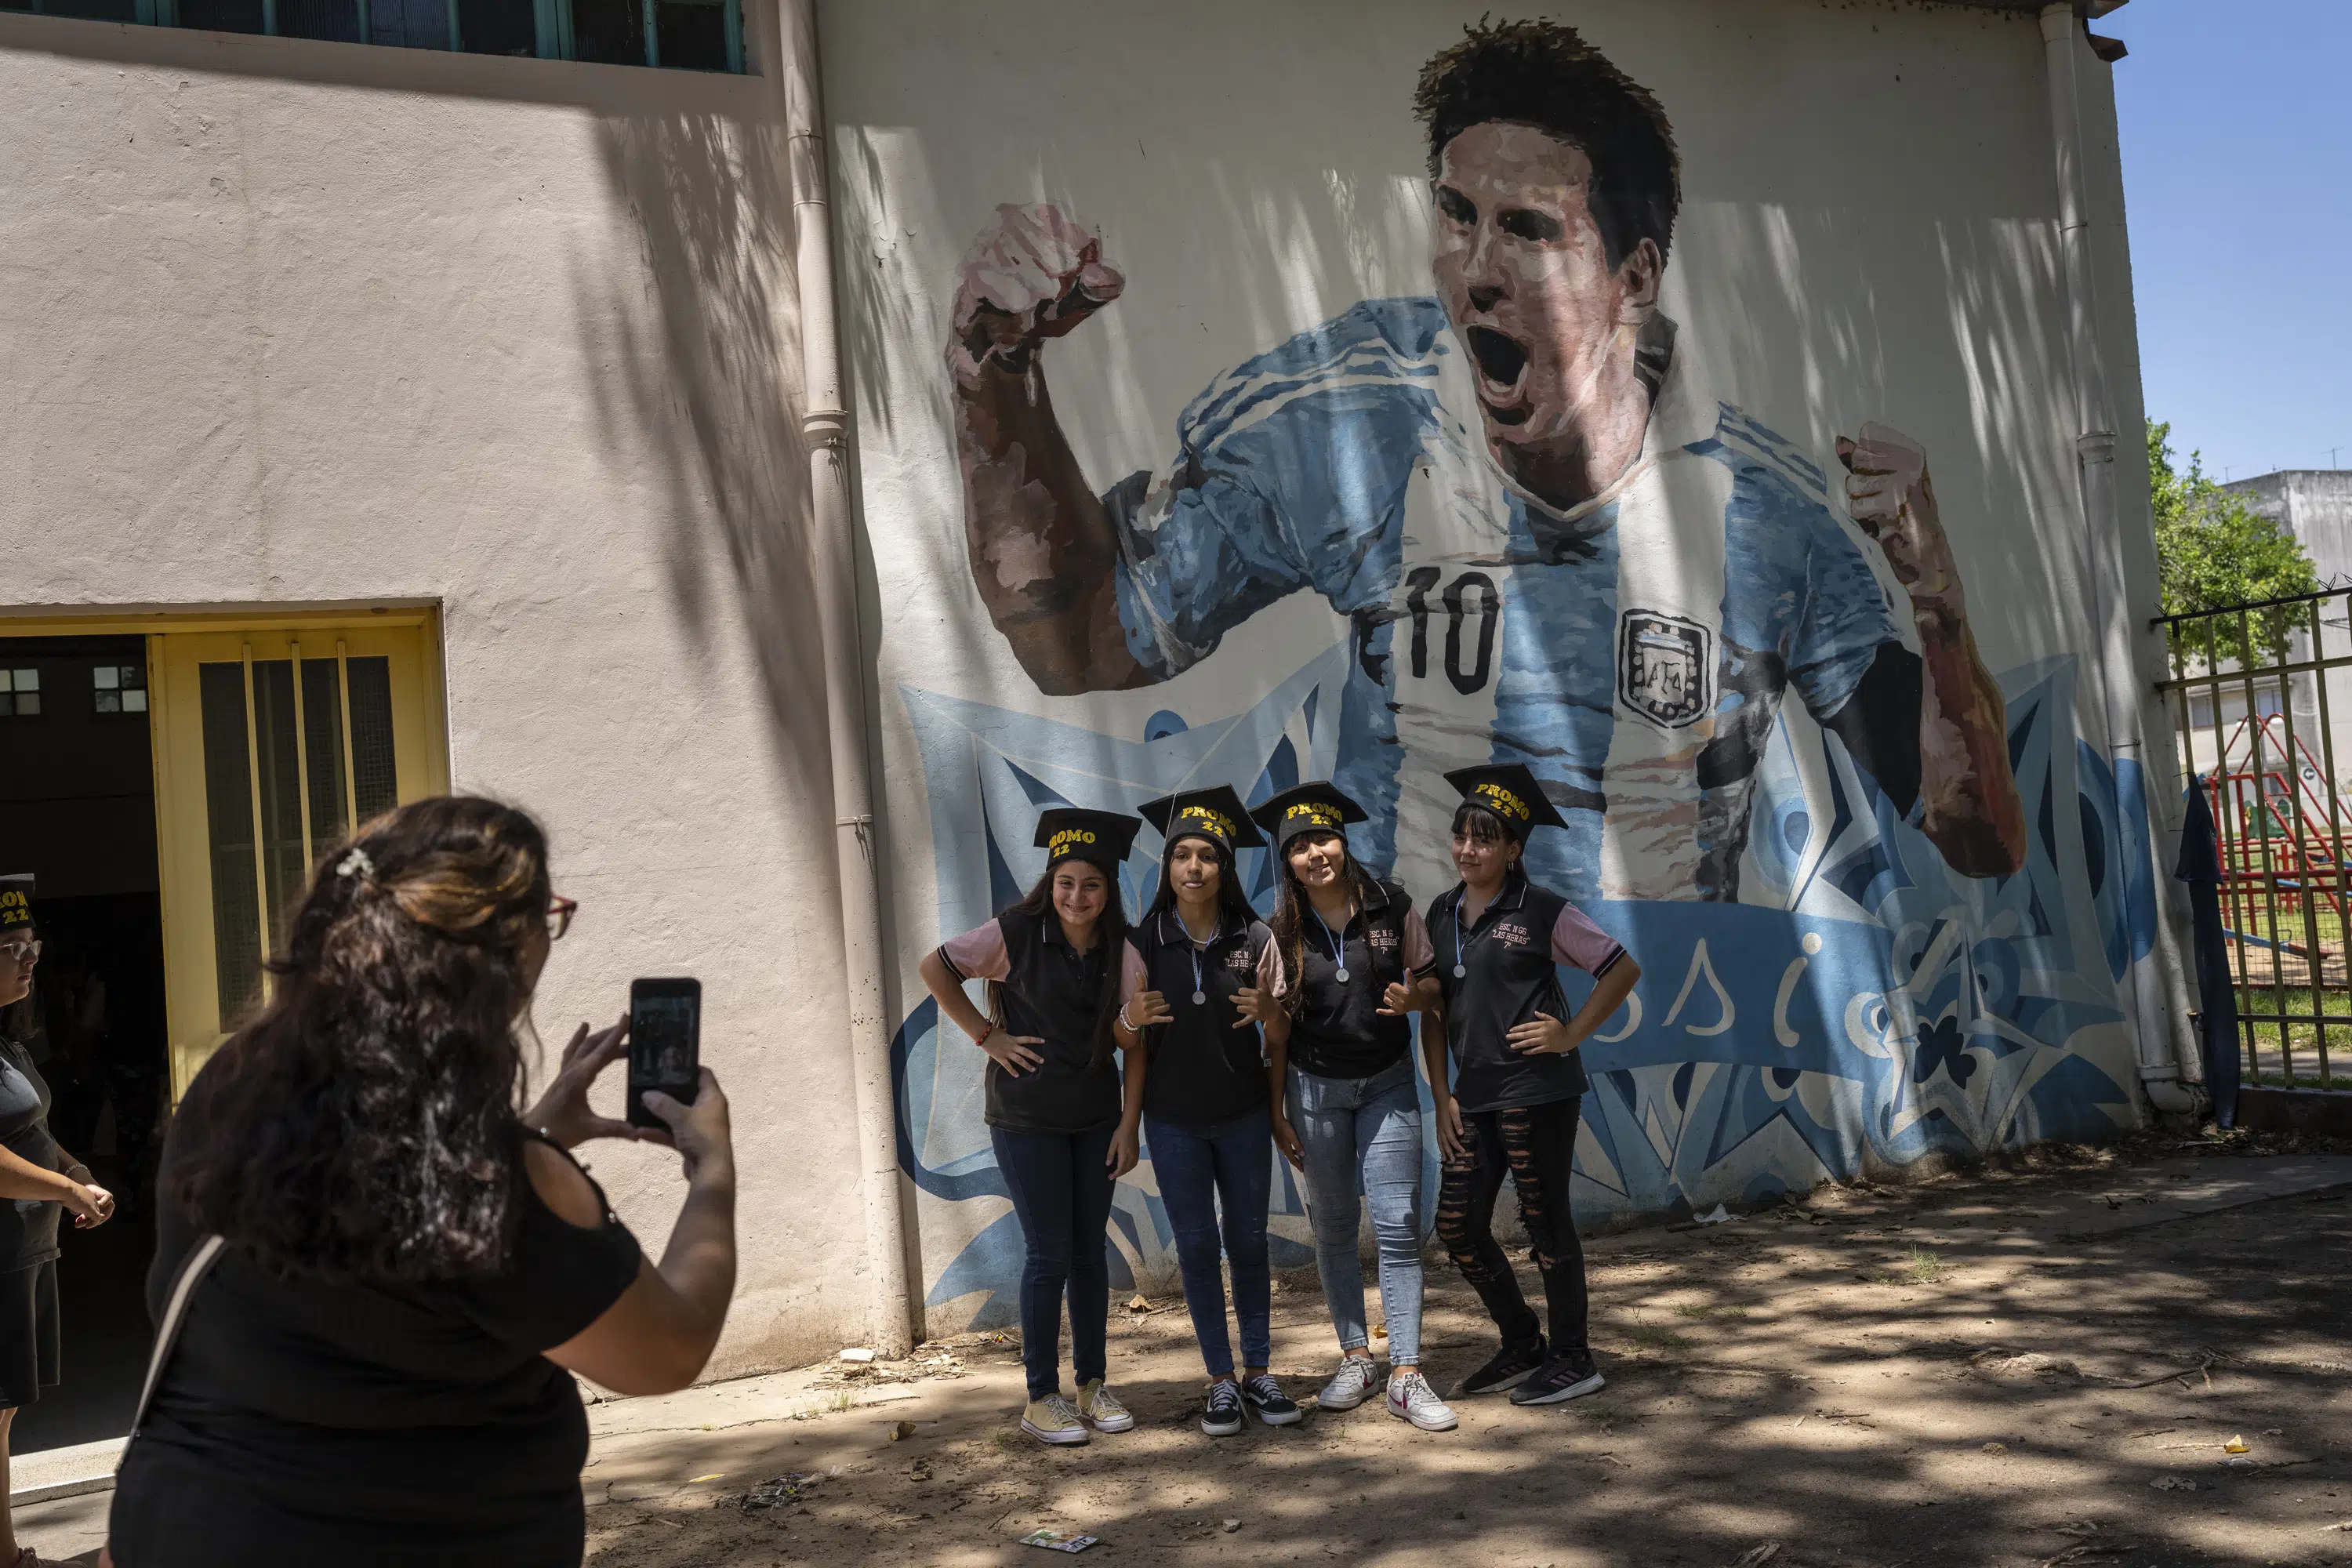 Messi's hometown in Argentina yearns for World Cup victory